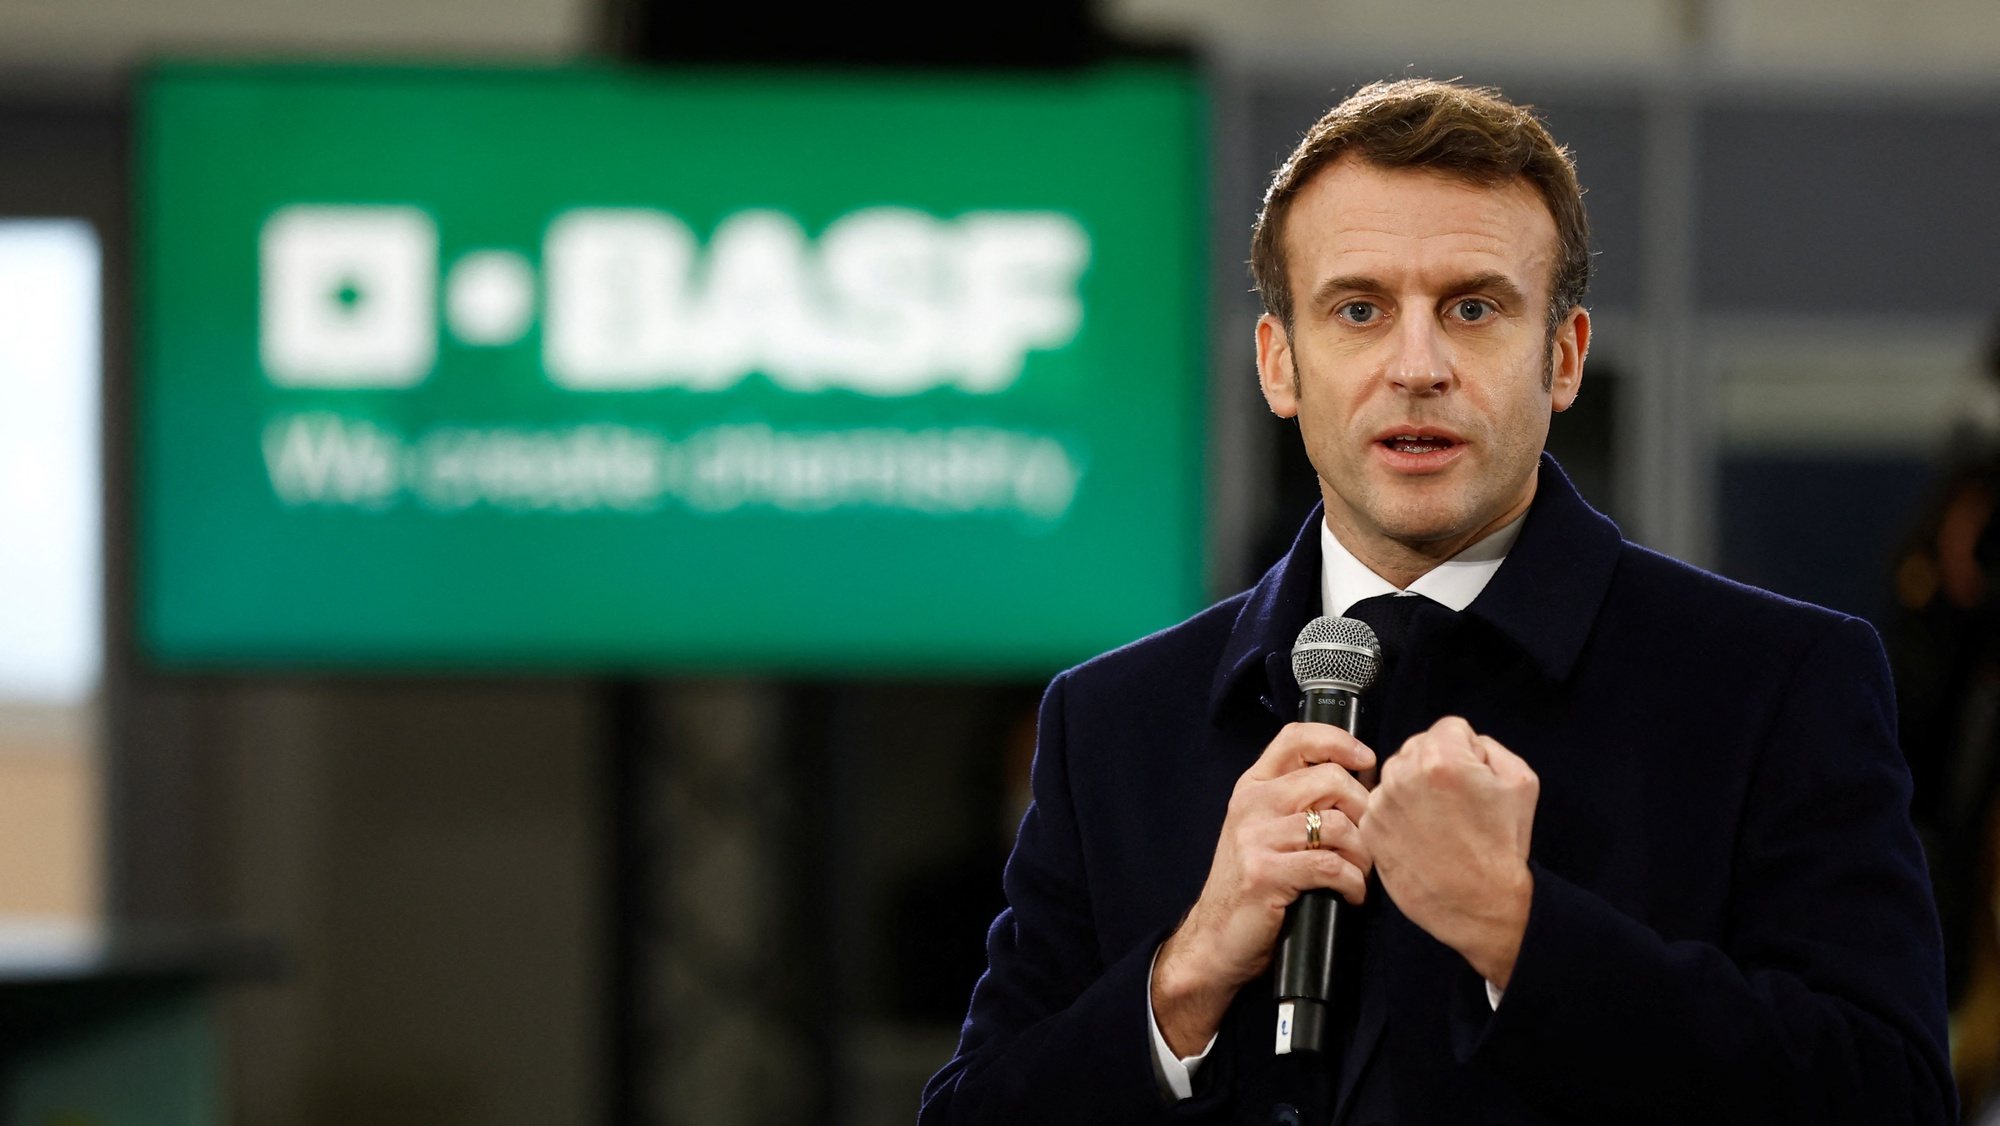 epa09691313 French President Emmanuel Macron delivers a speech during a visit at the WEurope platform by German chemical giant BASF at the Alsachimie industrial site in Chalampe, eastern France, 17 January 2022, as part of a day trip on the economic attractiveness and reindustrialization of France.  EPA/BENOIT TESSIER / POOL  MAXPPP OUT